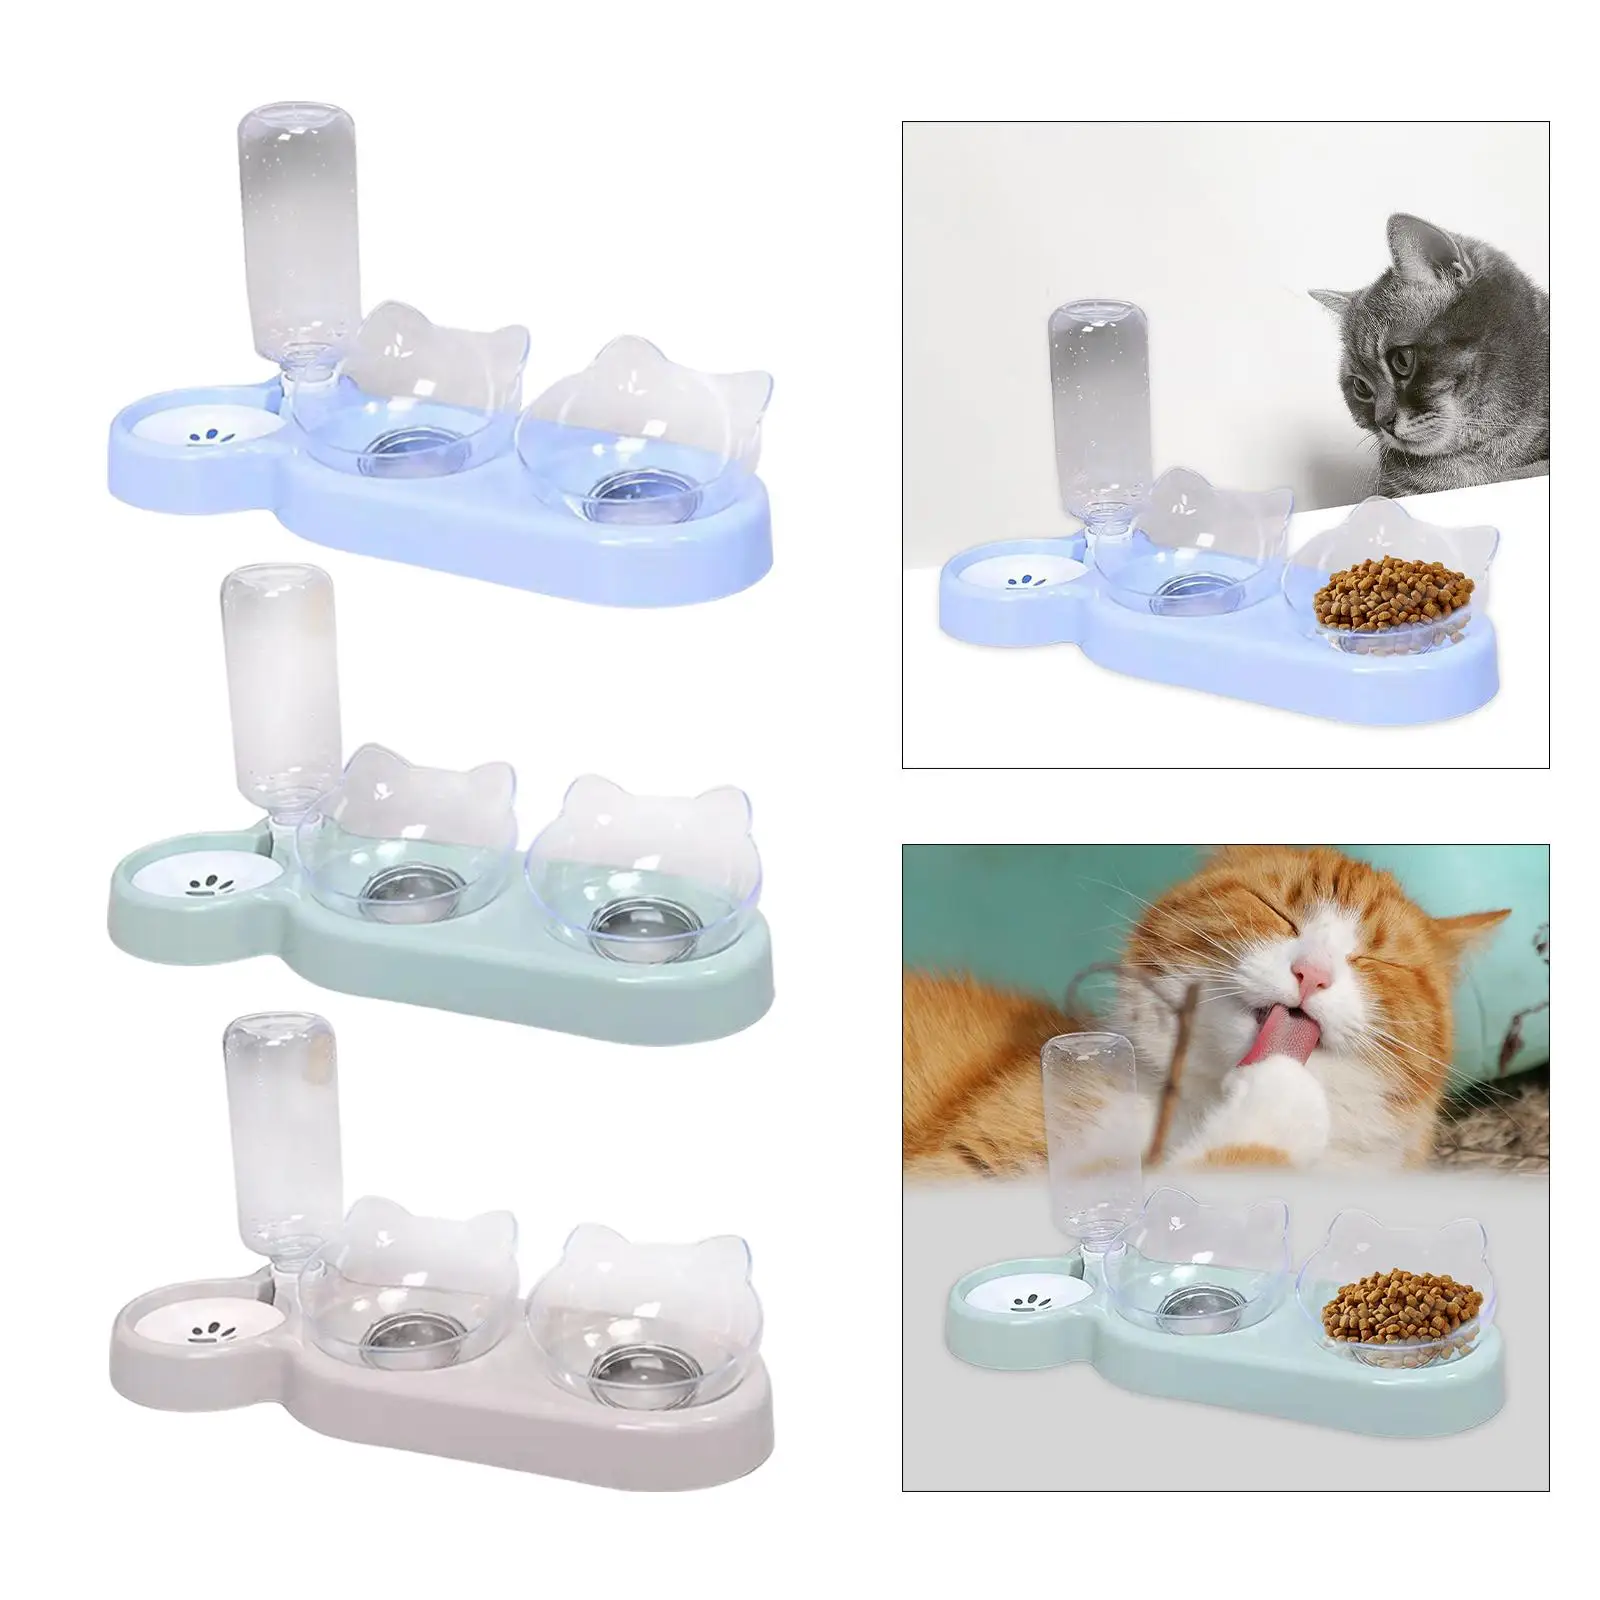 Tilted Cat Bowl Pet Feeder Water Dispenser Water Bottle Bowl Detachable for Small Dogs Pet Feeding and Watering Supplies Cat